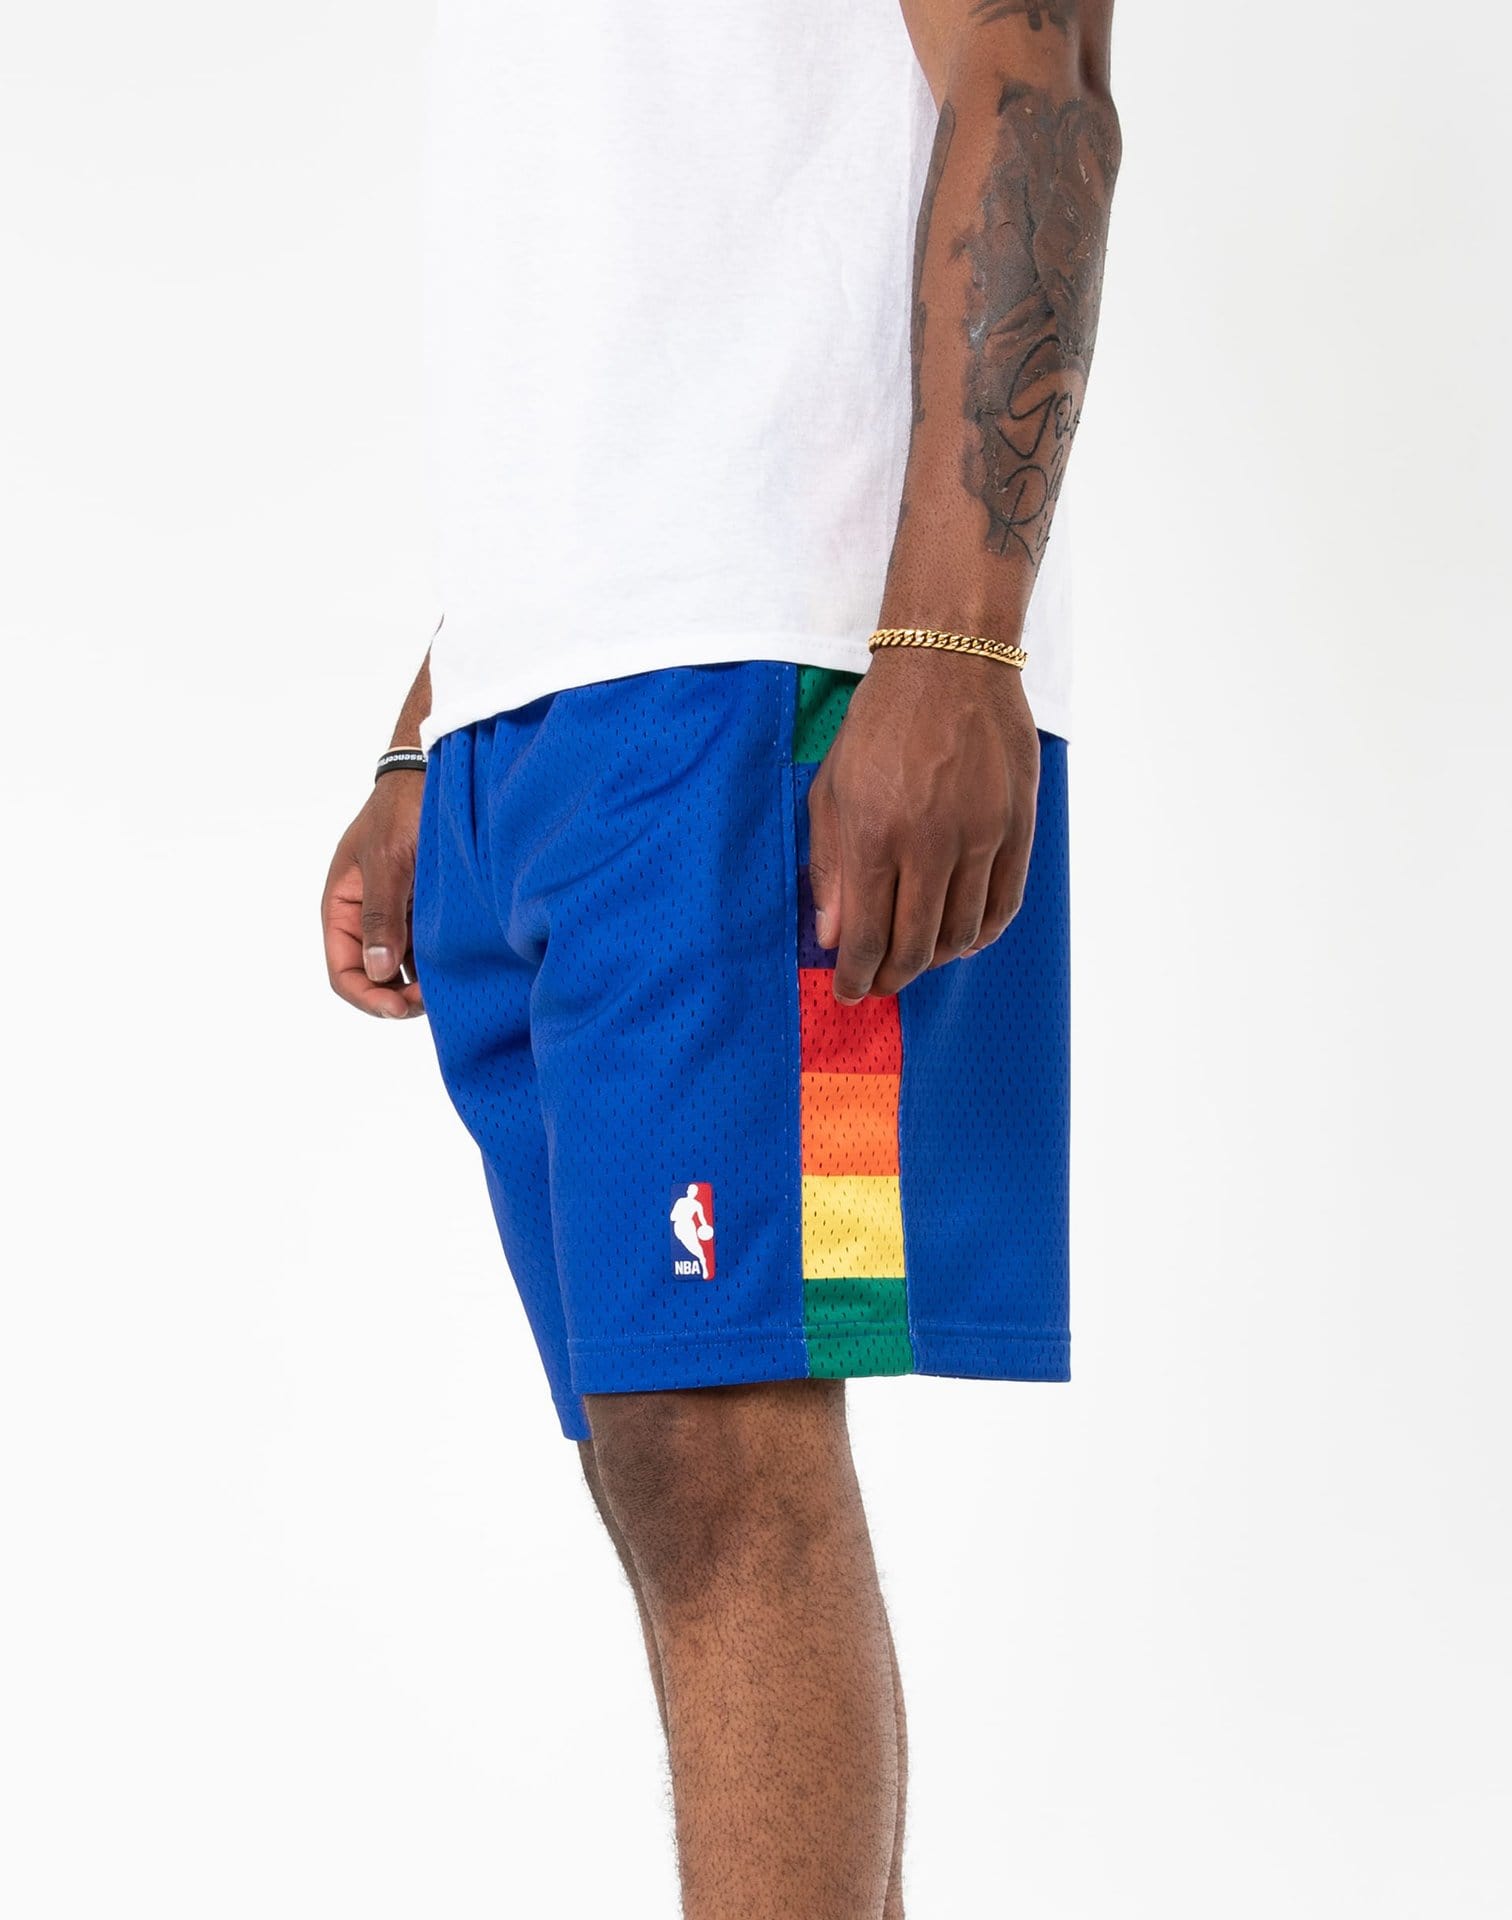 Mitchell and Ness NBA 1991 East All-Star Basketball Shorts Mens